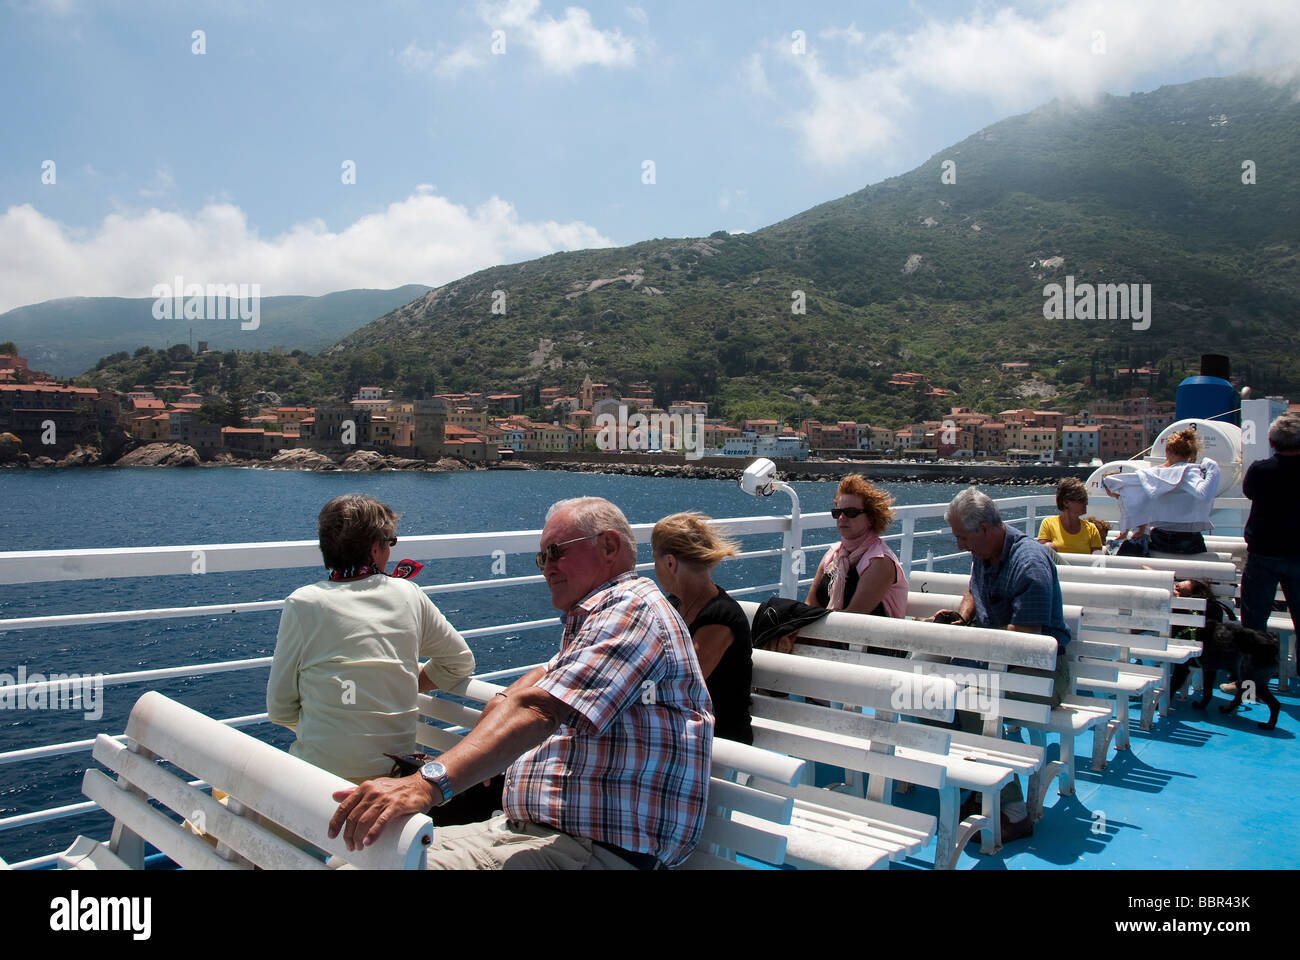 On ther Ferry leaving the Island of Giglio or Isola del Giglio off the Tuscan coast Stock Photo